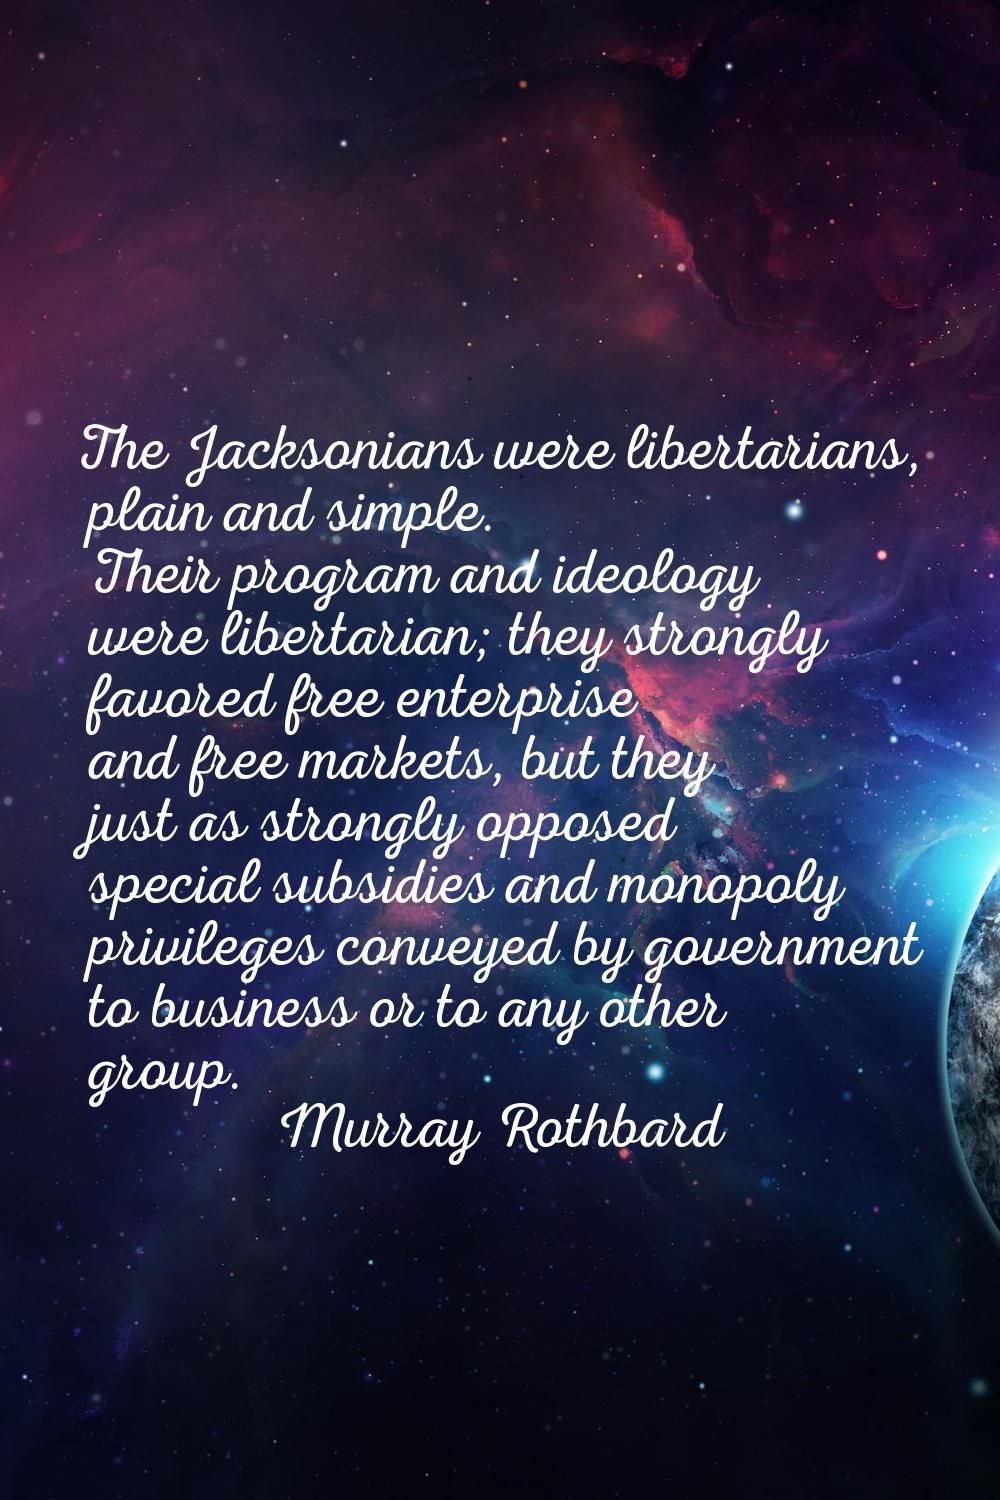 The Jacksonians were libertarians, plain and simple. Their program and ideology were libertarian; t